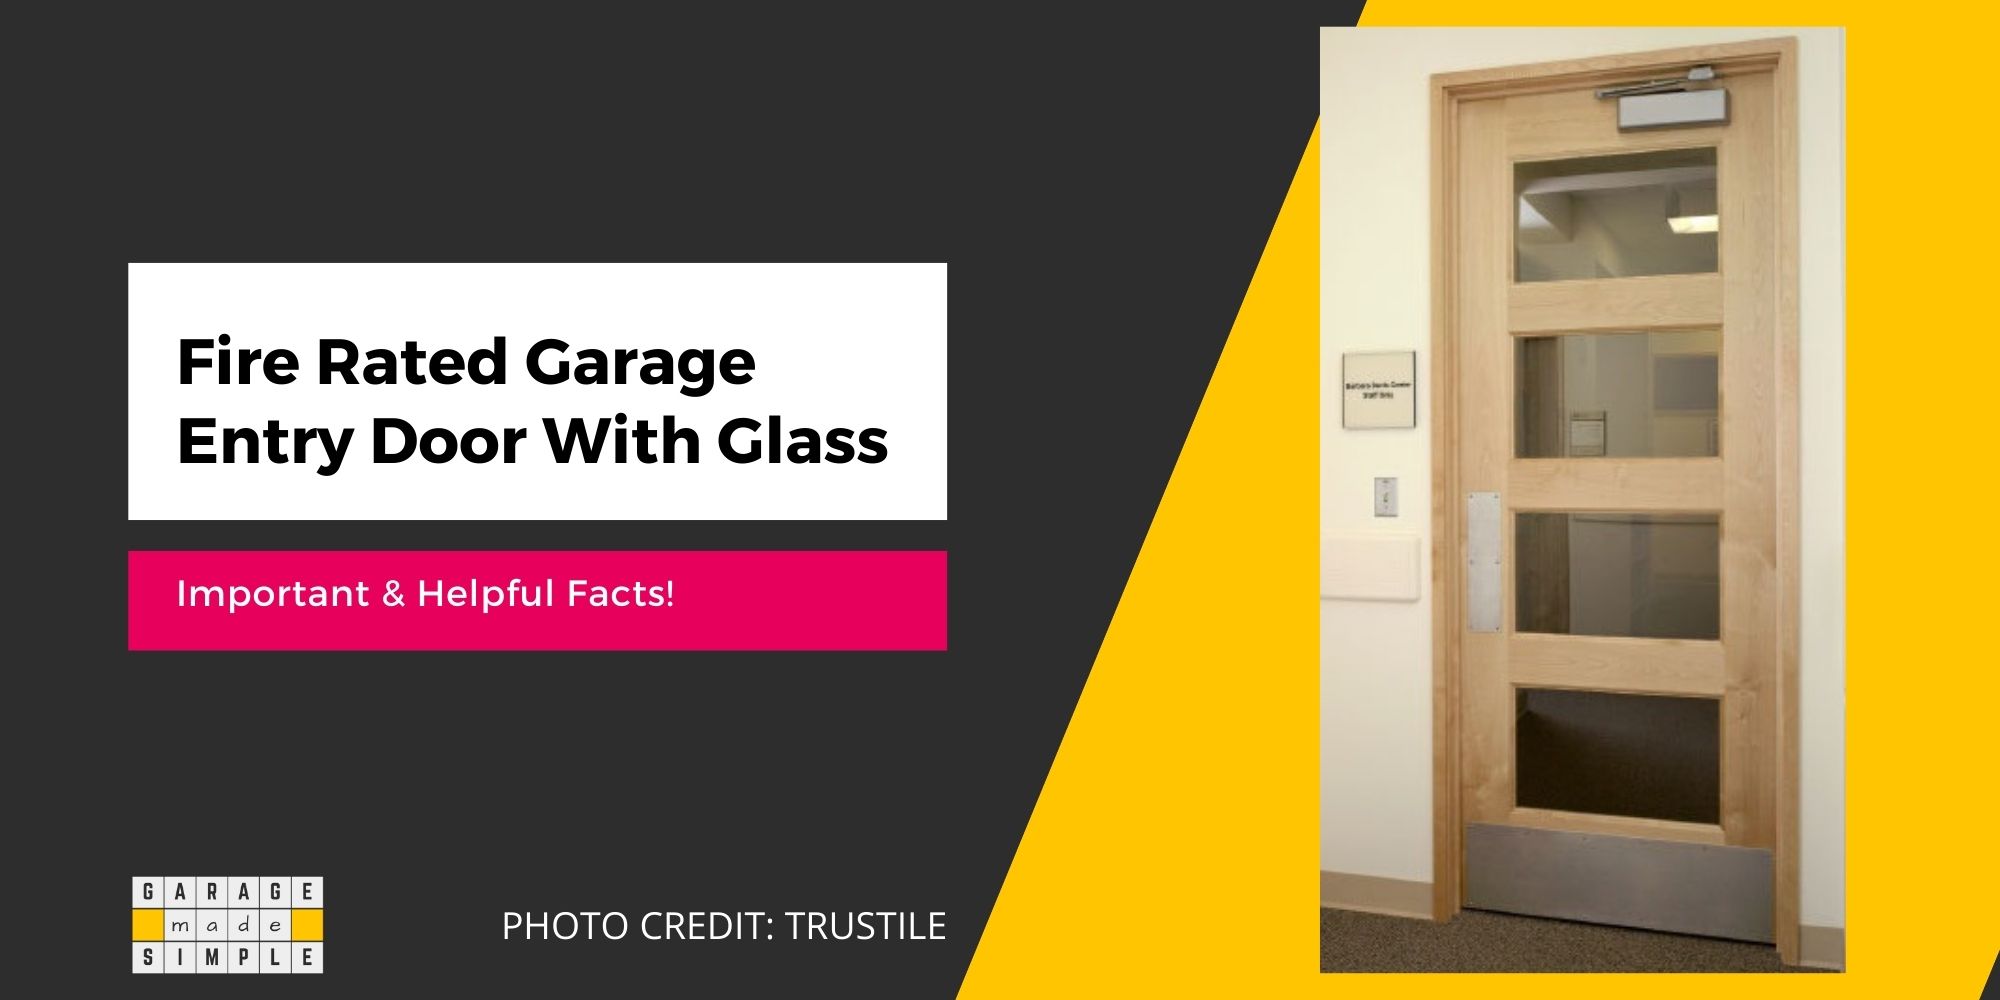 Is A Fire Rated Garage Entry Door With Glass OK? (Important & Helpful Facts!)